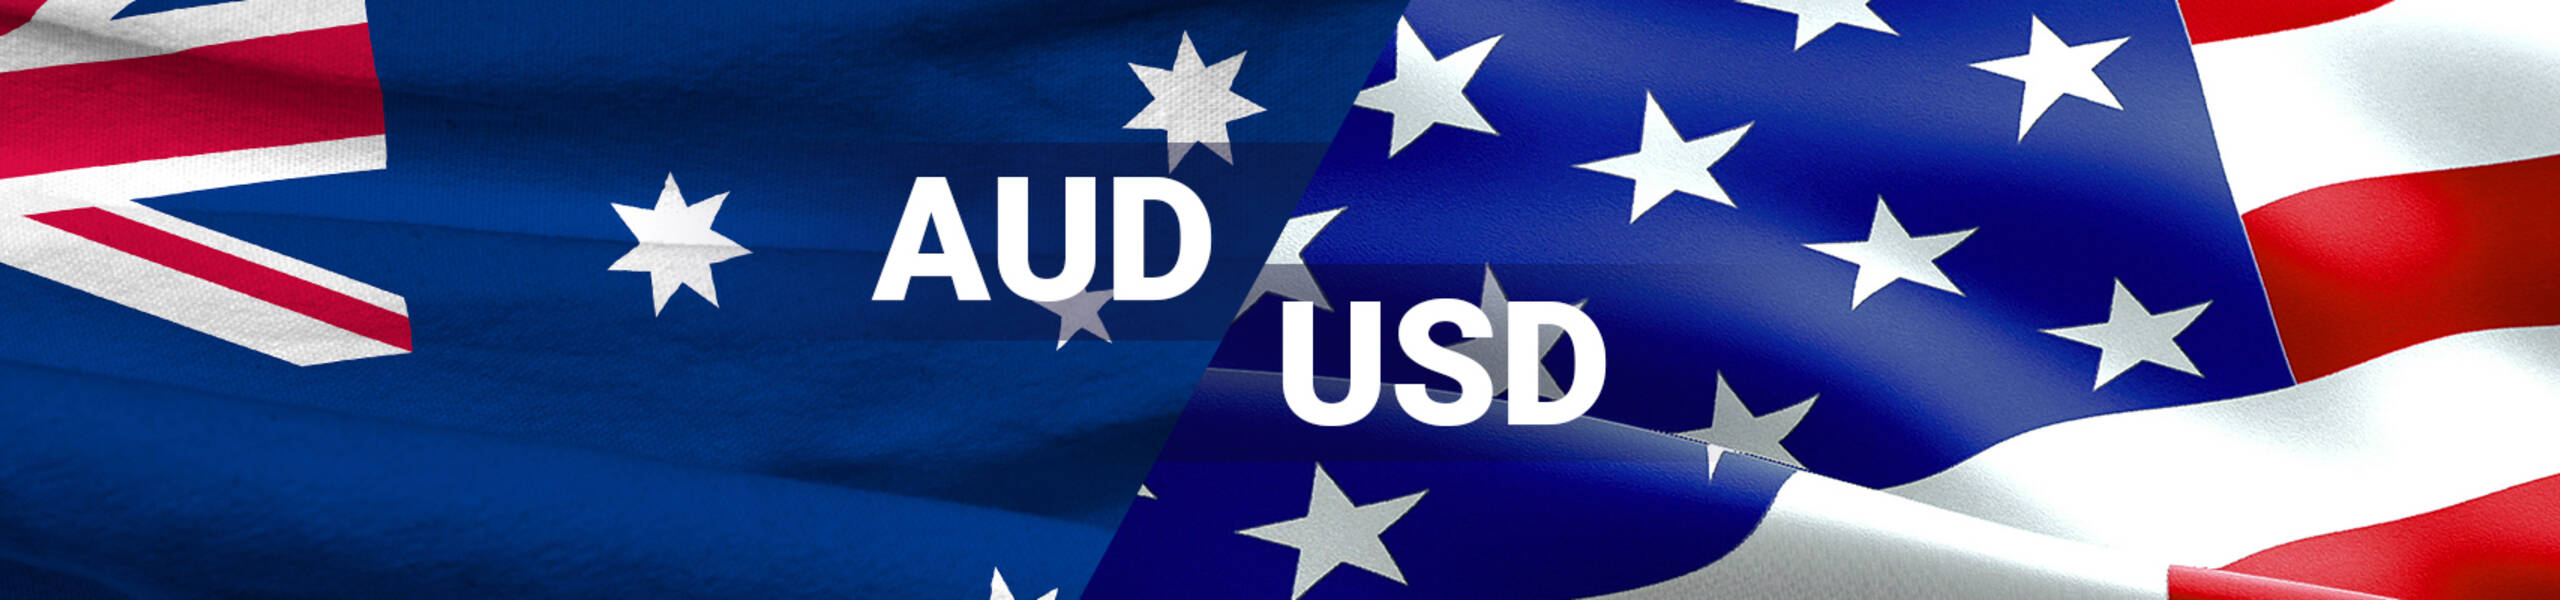 AUD/USD: aussie supported by SSB